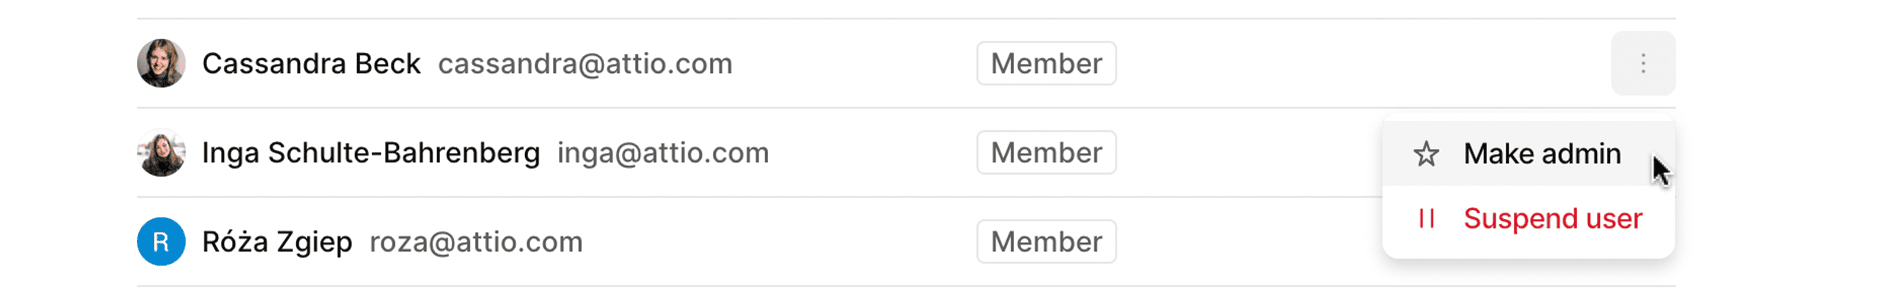 The cursor hovers over a dropdown beside a team member's name, offering the option to either edit their access (member or admin) or suspend them.